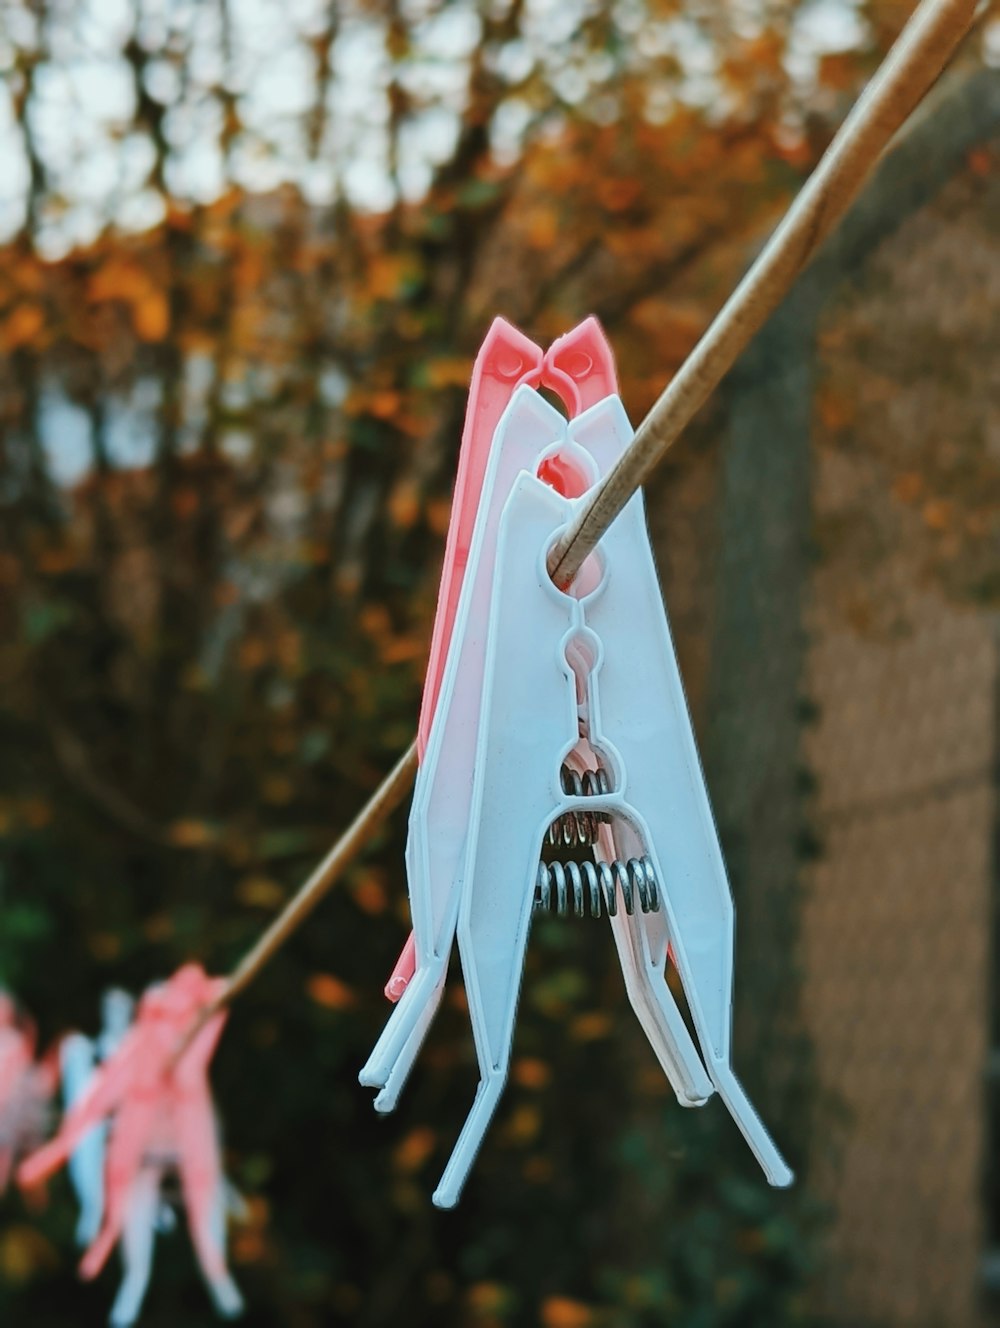 a pink and white wind chime hanging from a tree